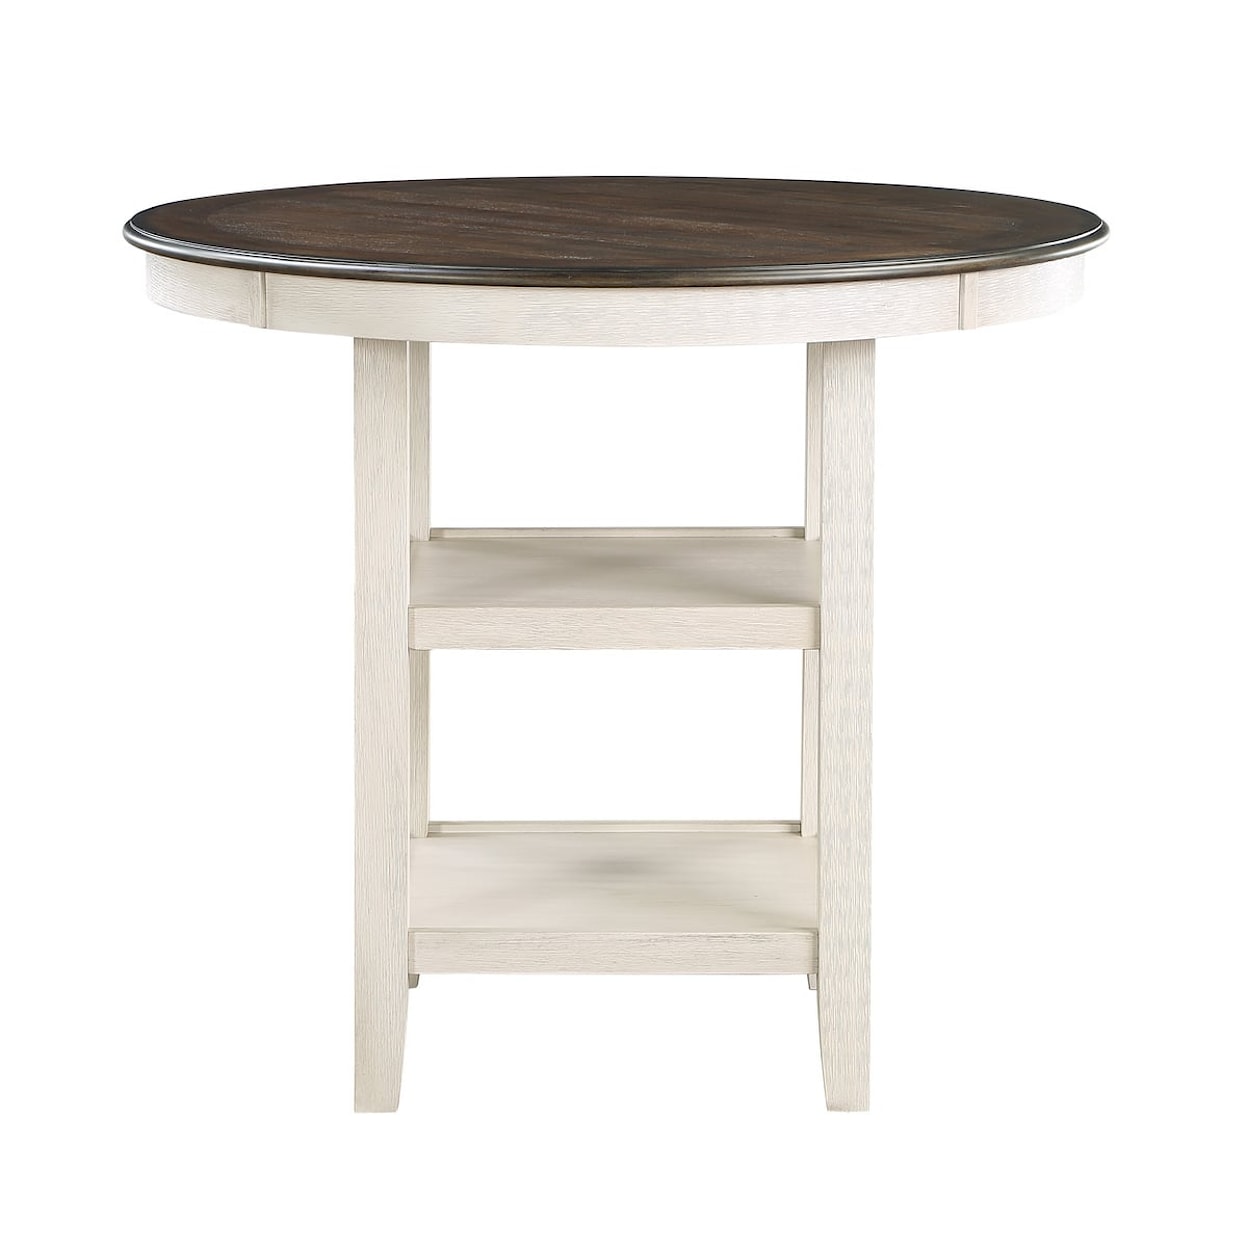 Homelegance Furniture Asher Counter Height Table